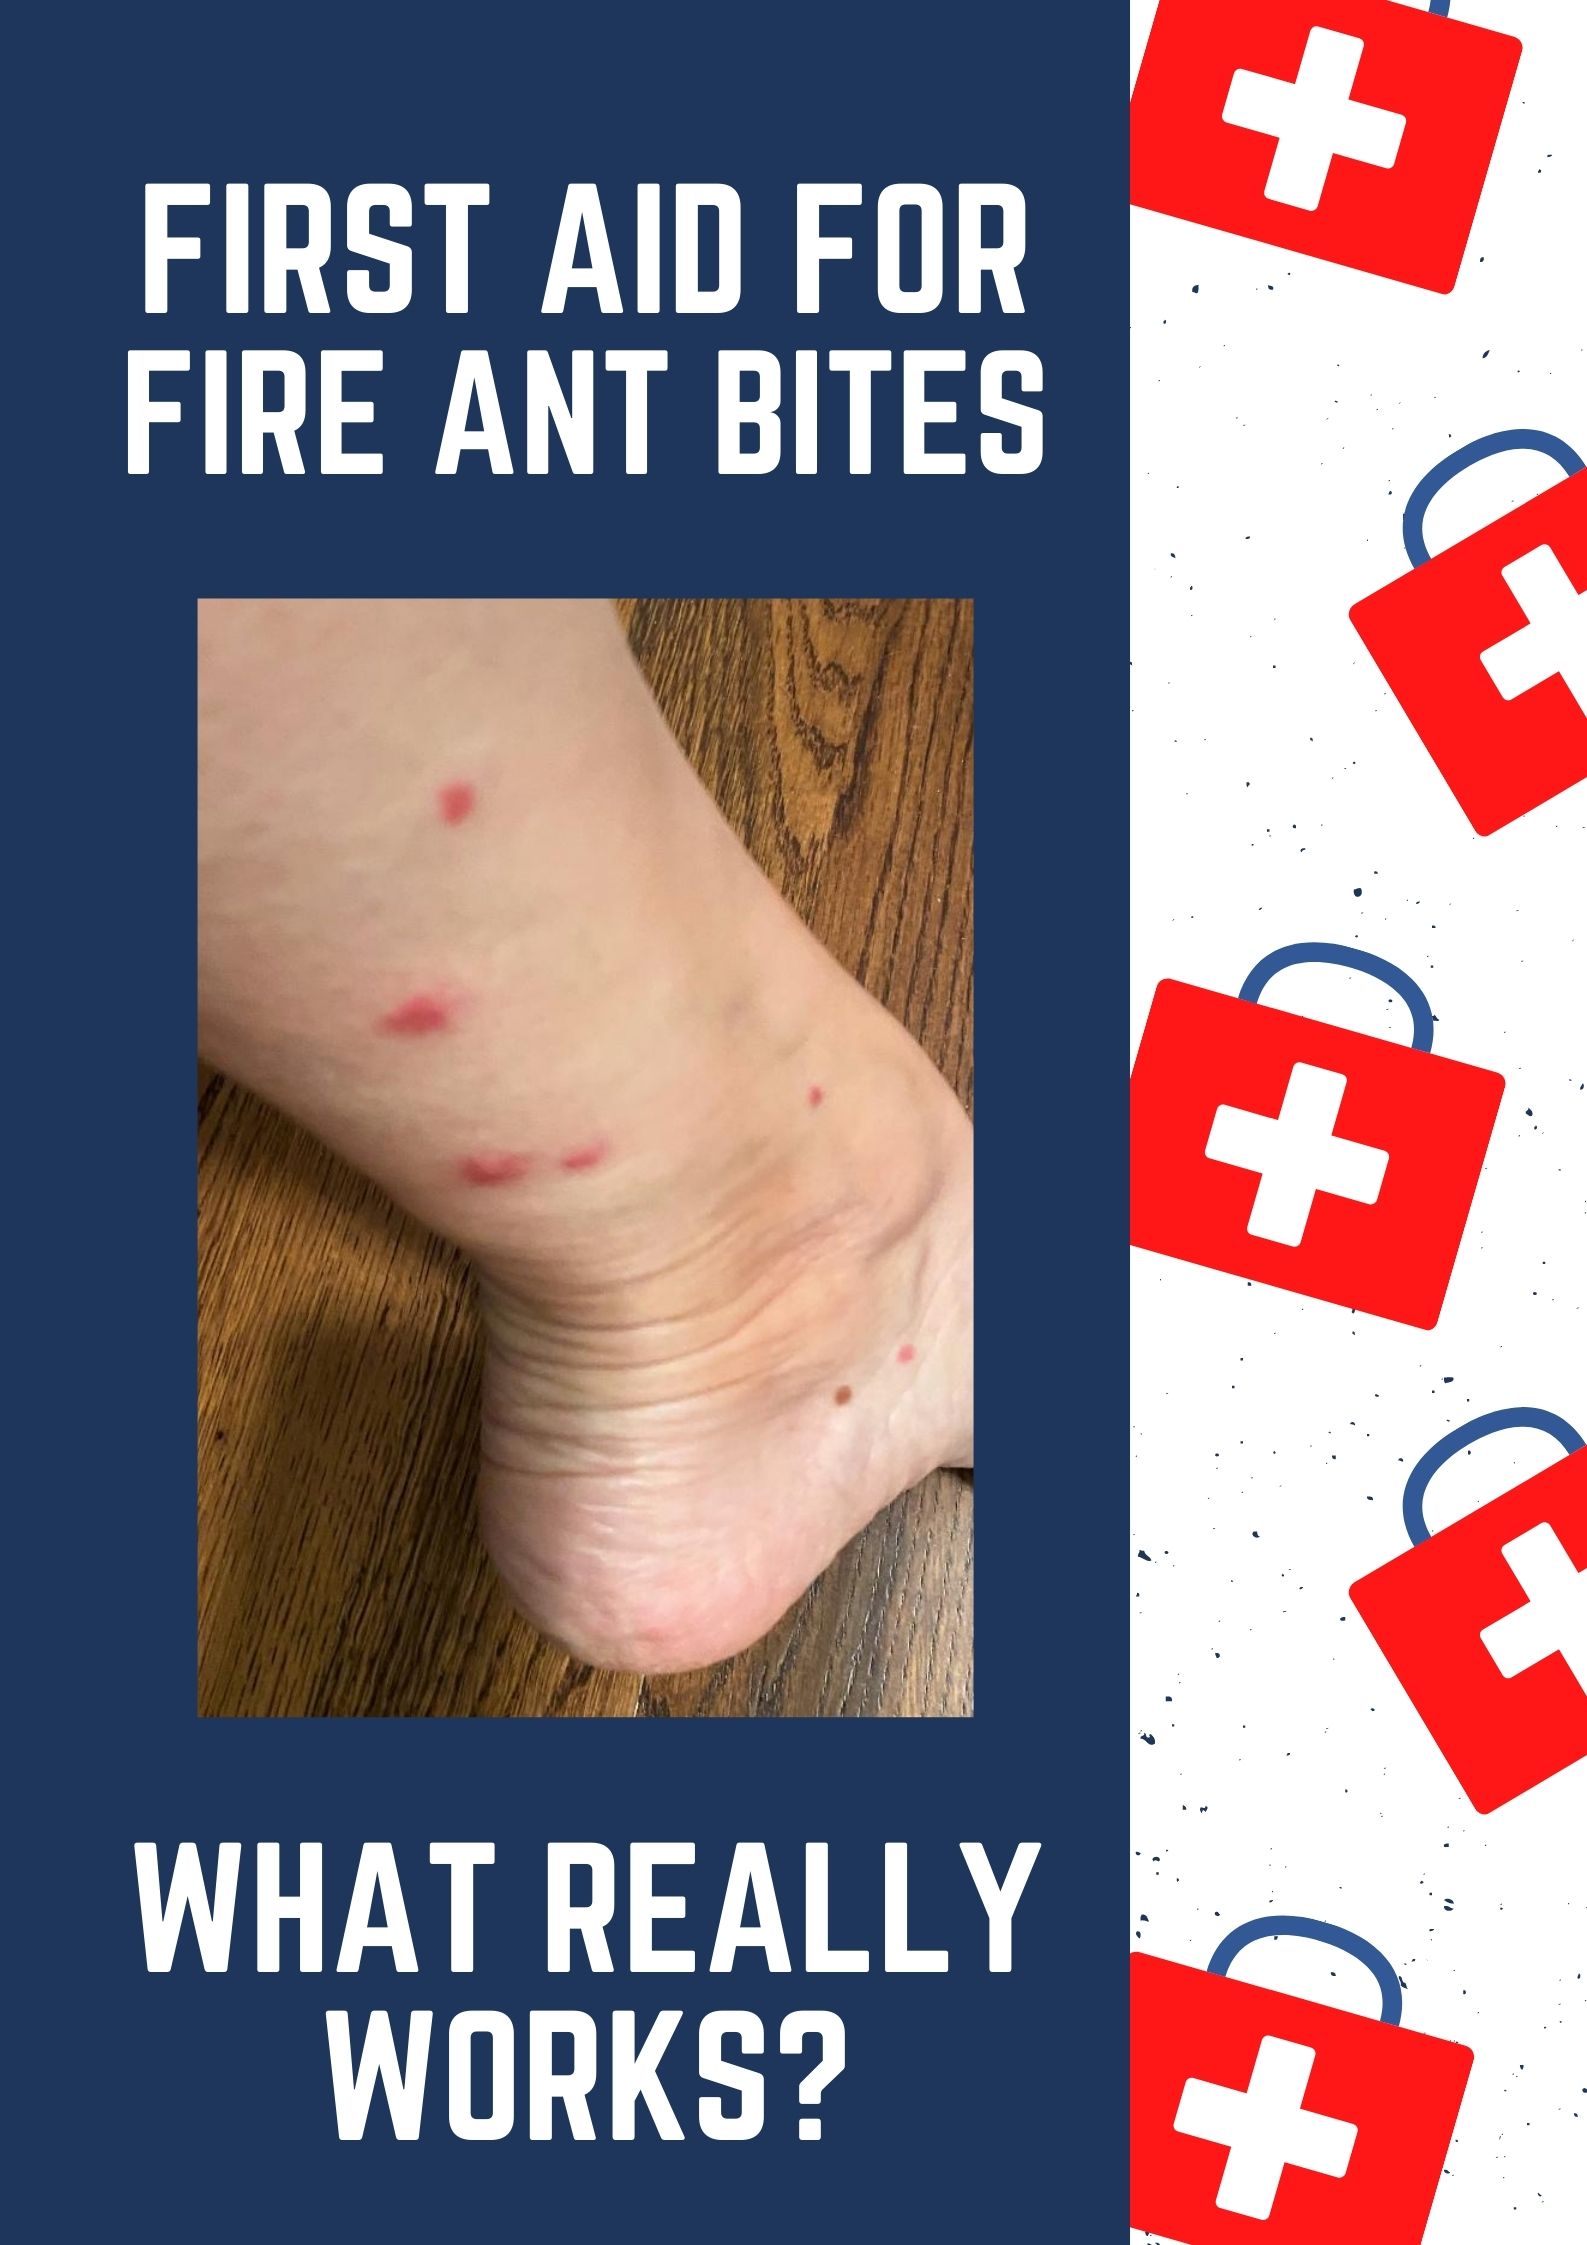 Ever had a fire ant bite? They're horrible! They itch. They sting. They hurt... BUT, treating them is easy with items you have around the house! Find out what home remedies work best -- and what to avoid for fire ant stings. (But, if you are having trouble breathing, call 911.)